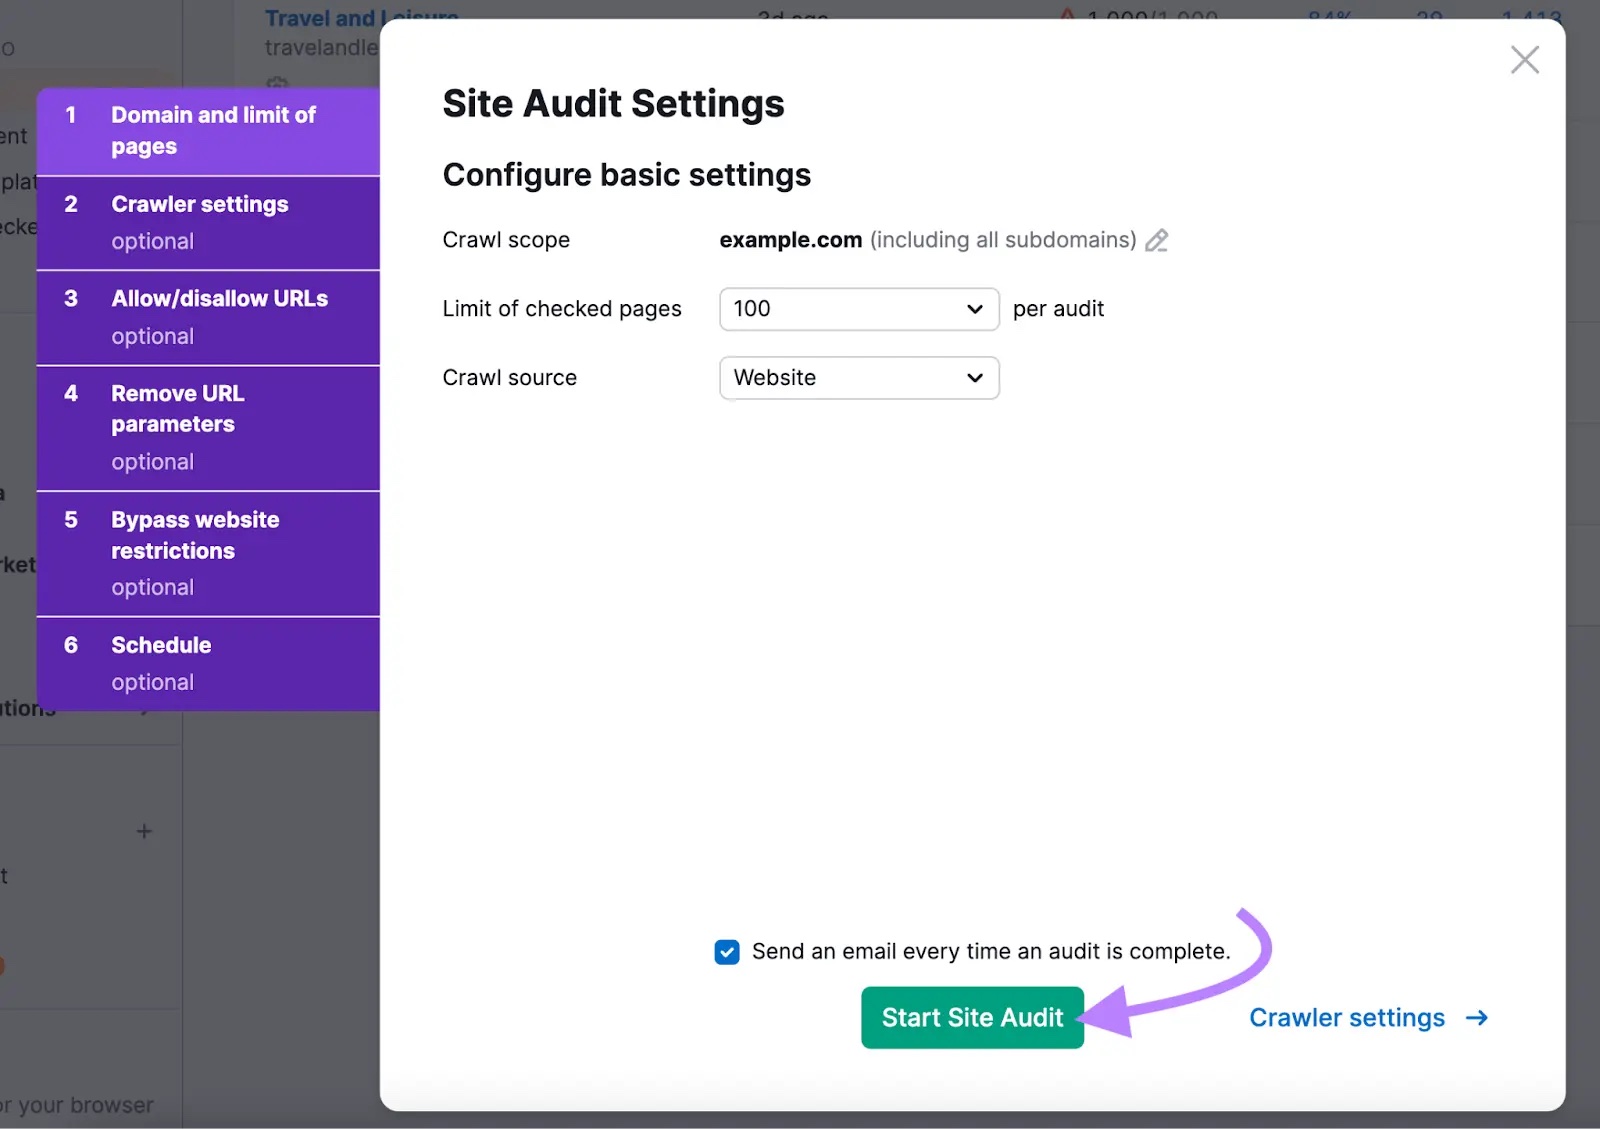 Site Audit Settings page showing crawl scope, source and limit of checked pages.